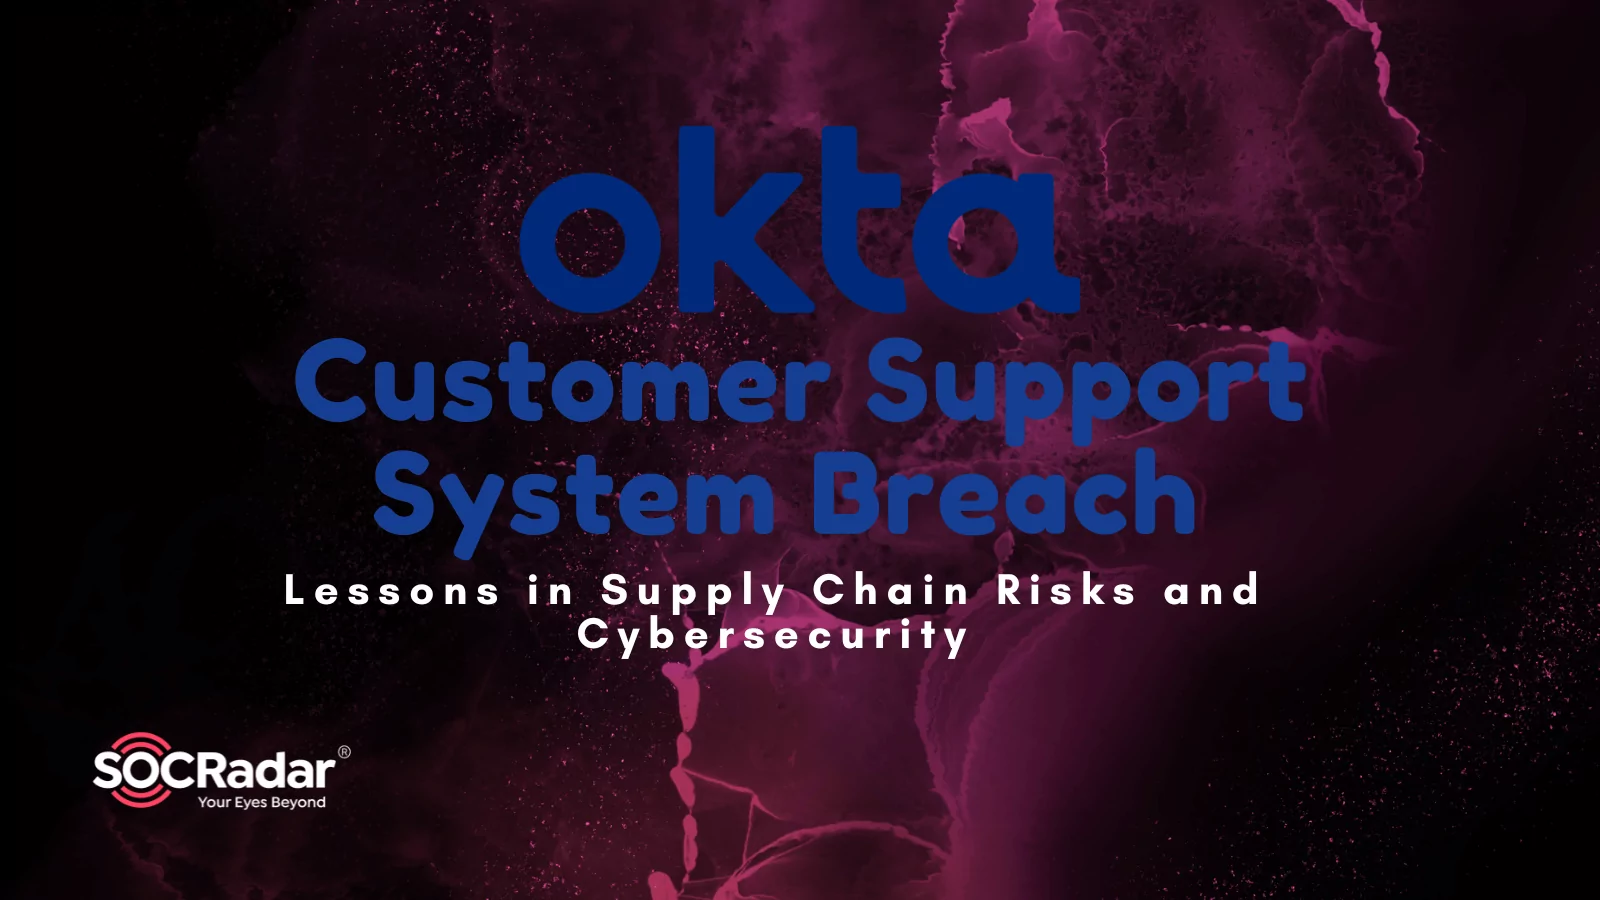 SOCRadar® Cyber Intelligence Inc. | Okta Customer Support System Breach: Lessons in Supply Chain Risks and Cybersecurity